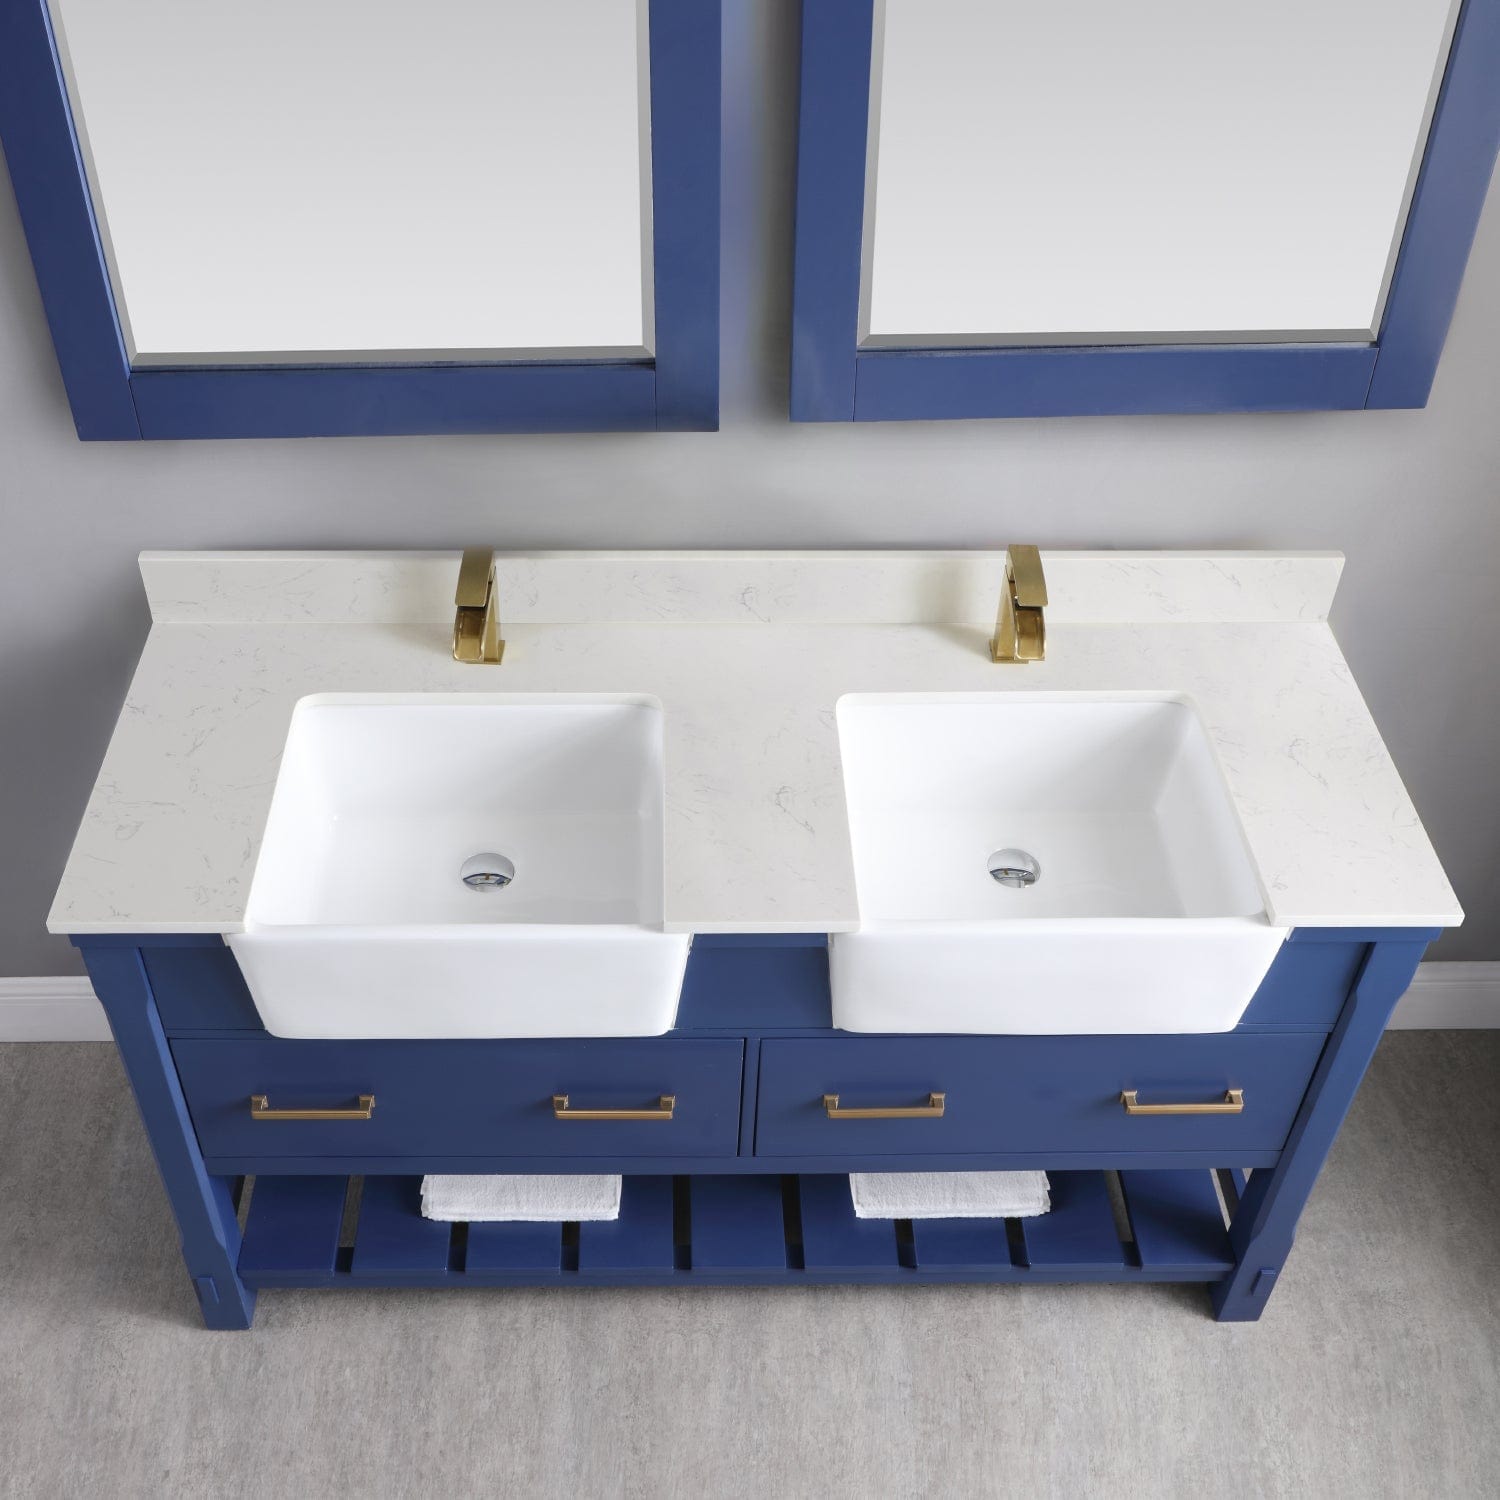 Altair Georgia 60" Double Bathroom Vanity Set in Jewelry Blue and Composite Carrara White Stone Top with White Farmhouse Basin with Mirror 537060-JB-AW - Molaix631112970631Vanity537060-JB-AW